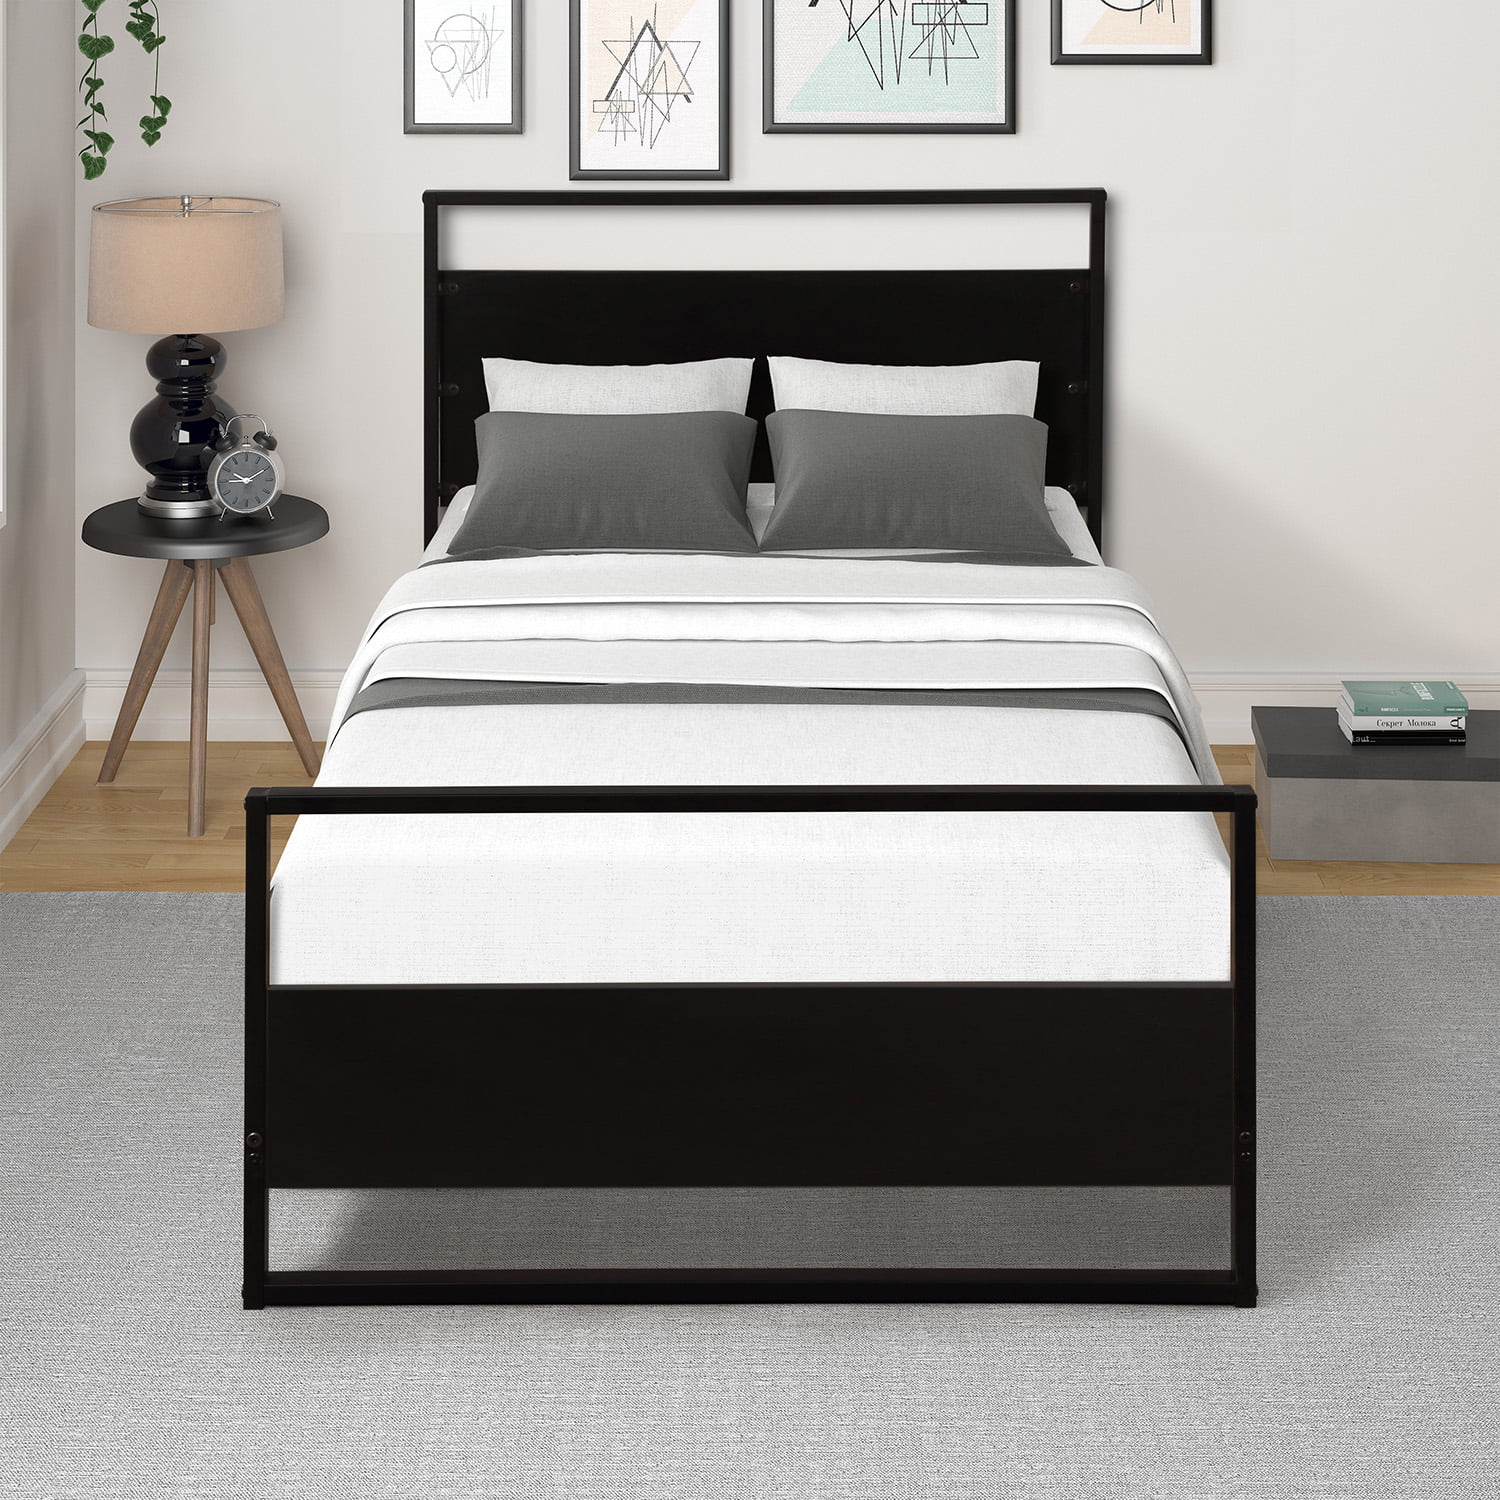 Twin Metal Bed Frame Black, Black Upholstered Twin Bed Frame With Storage